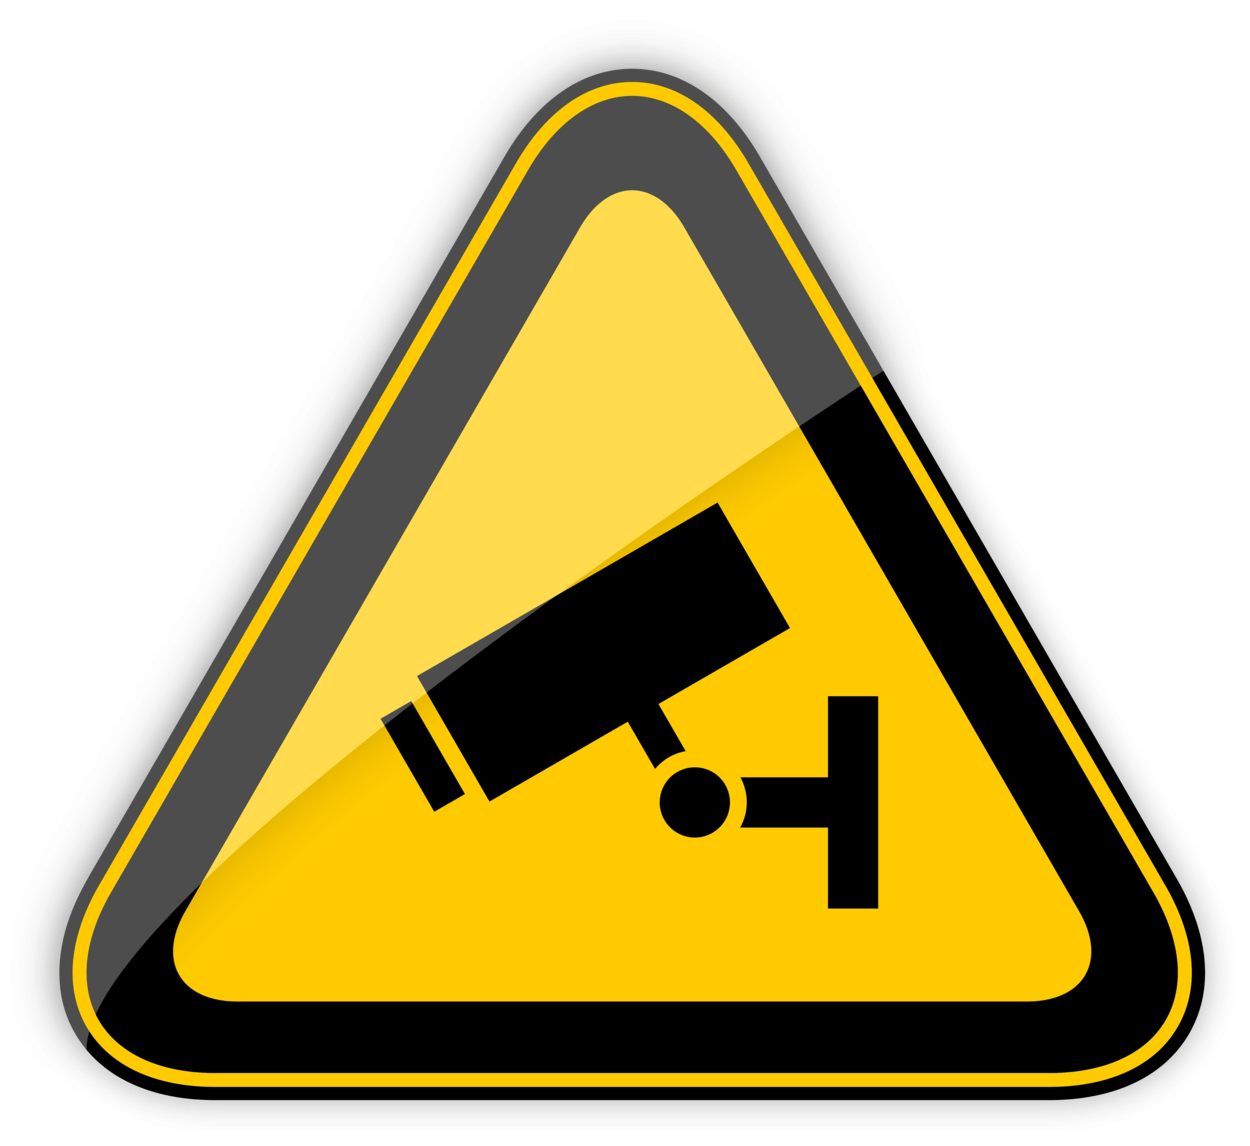 CCTV in Operation Warning Sign PNG Clipart